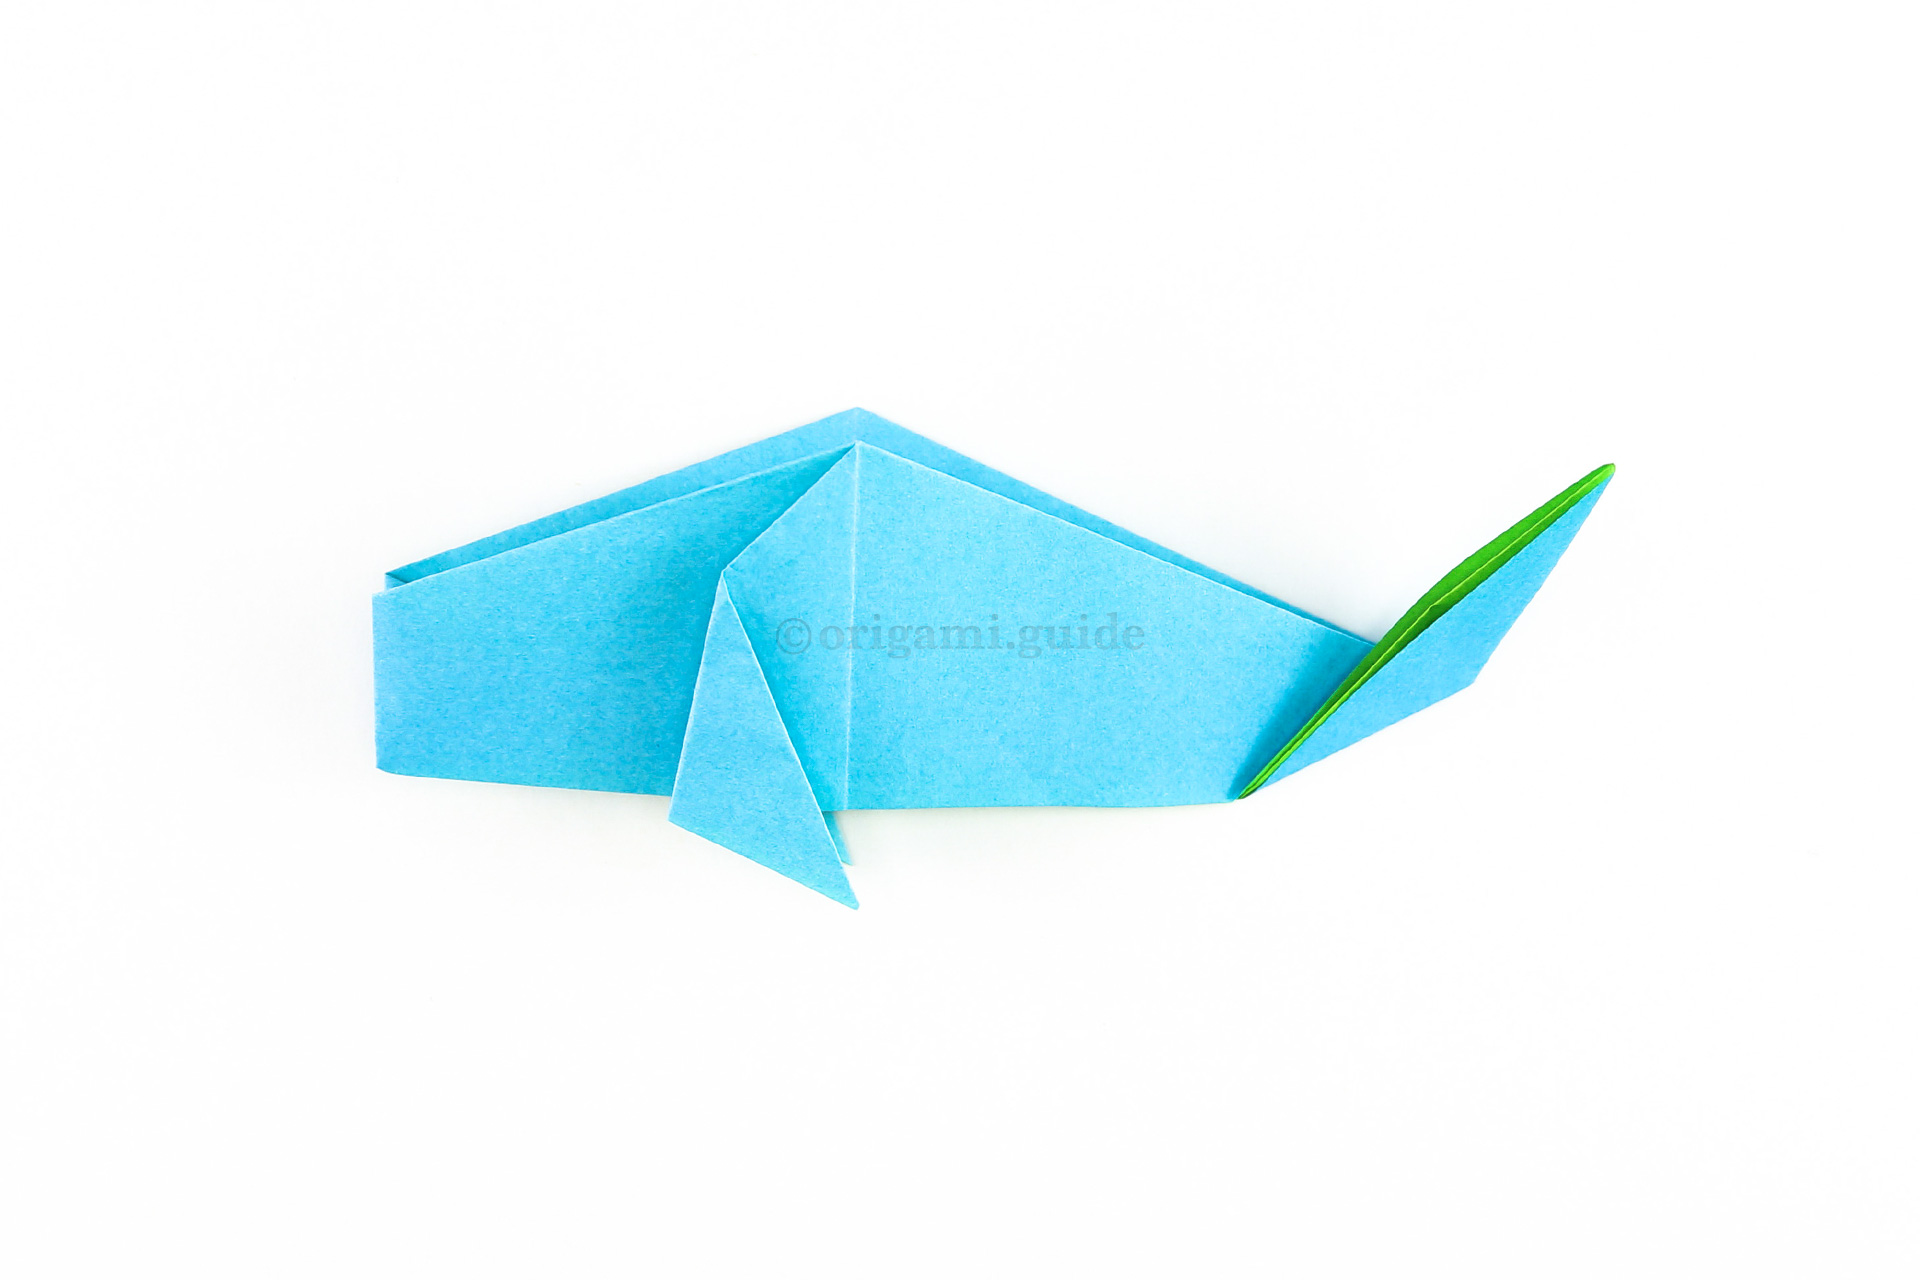 To shape the tail, fold it up at an angle as shown.